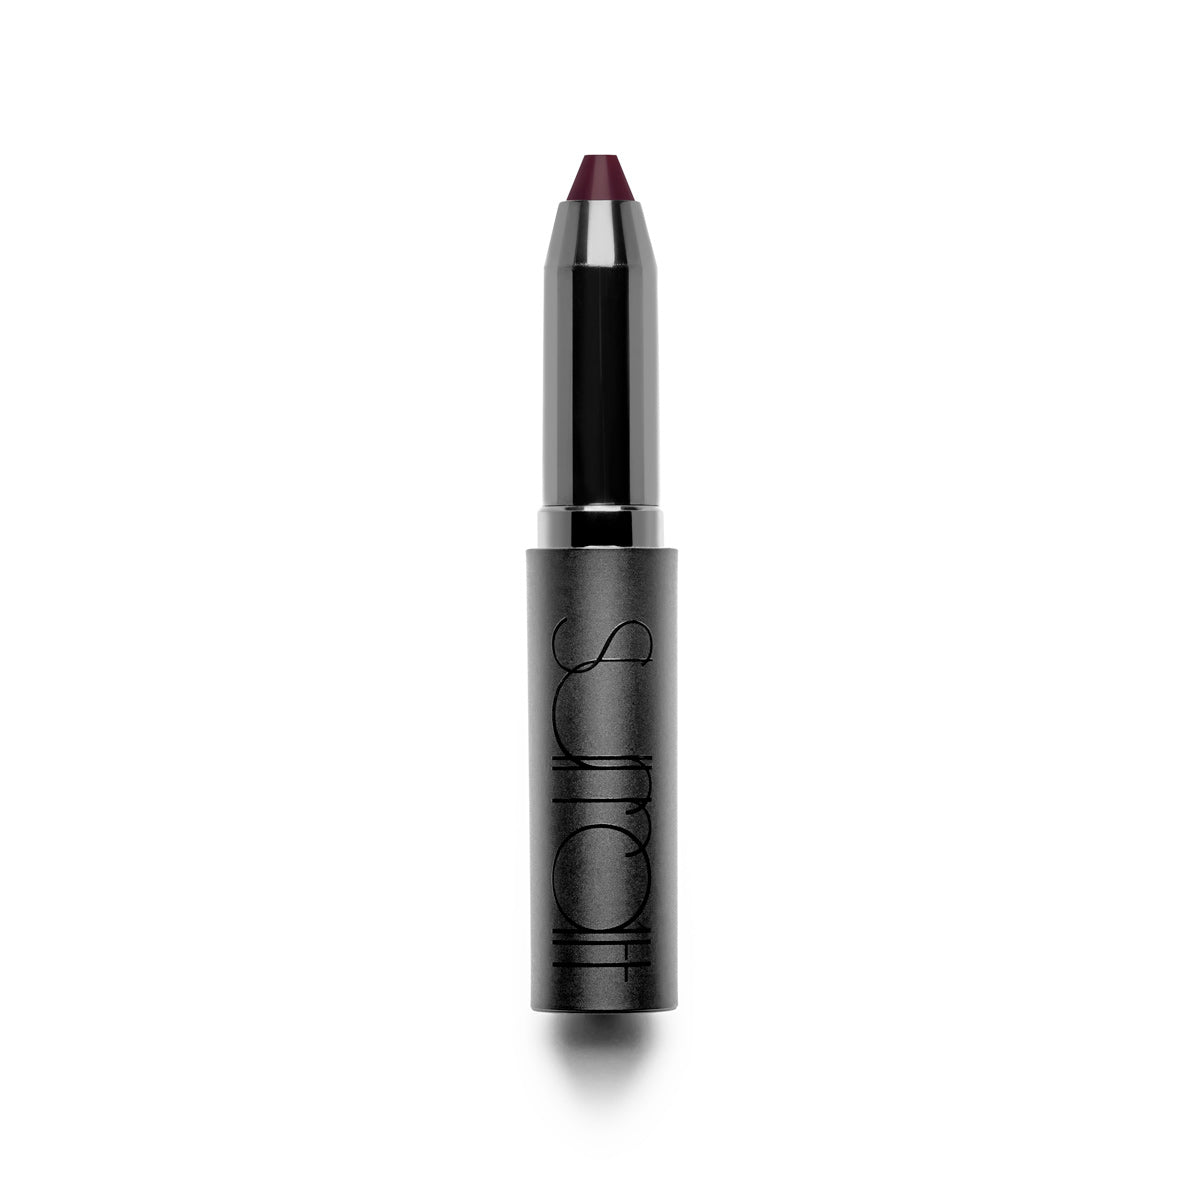 SEDUCTRICE - DEEP BLUE RED - long-wearing matte finish lipstick in deep blue red shade